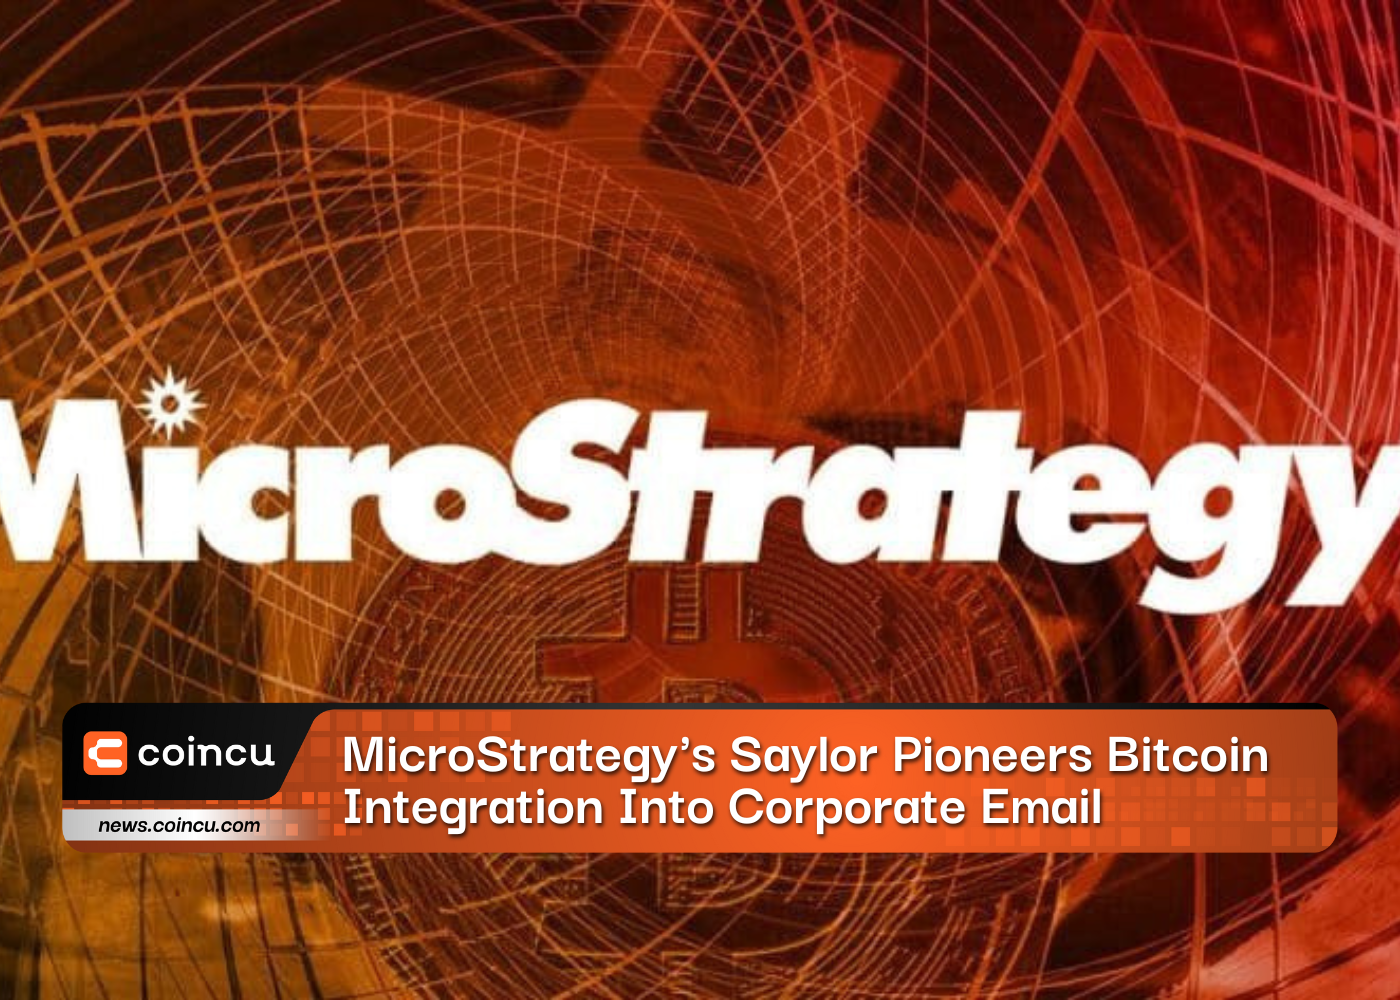 MicroStrategys Saylor Pioneers Bitcoin Integration